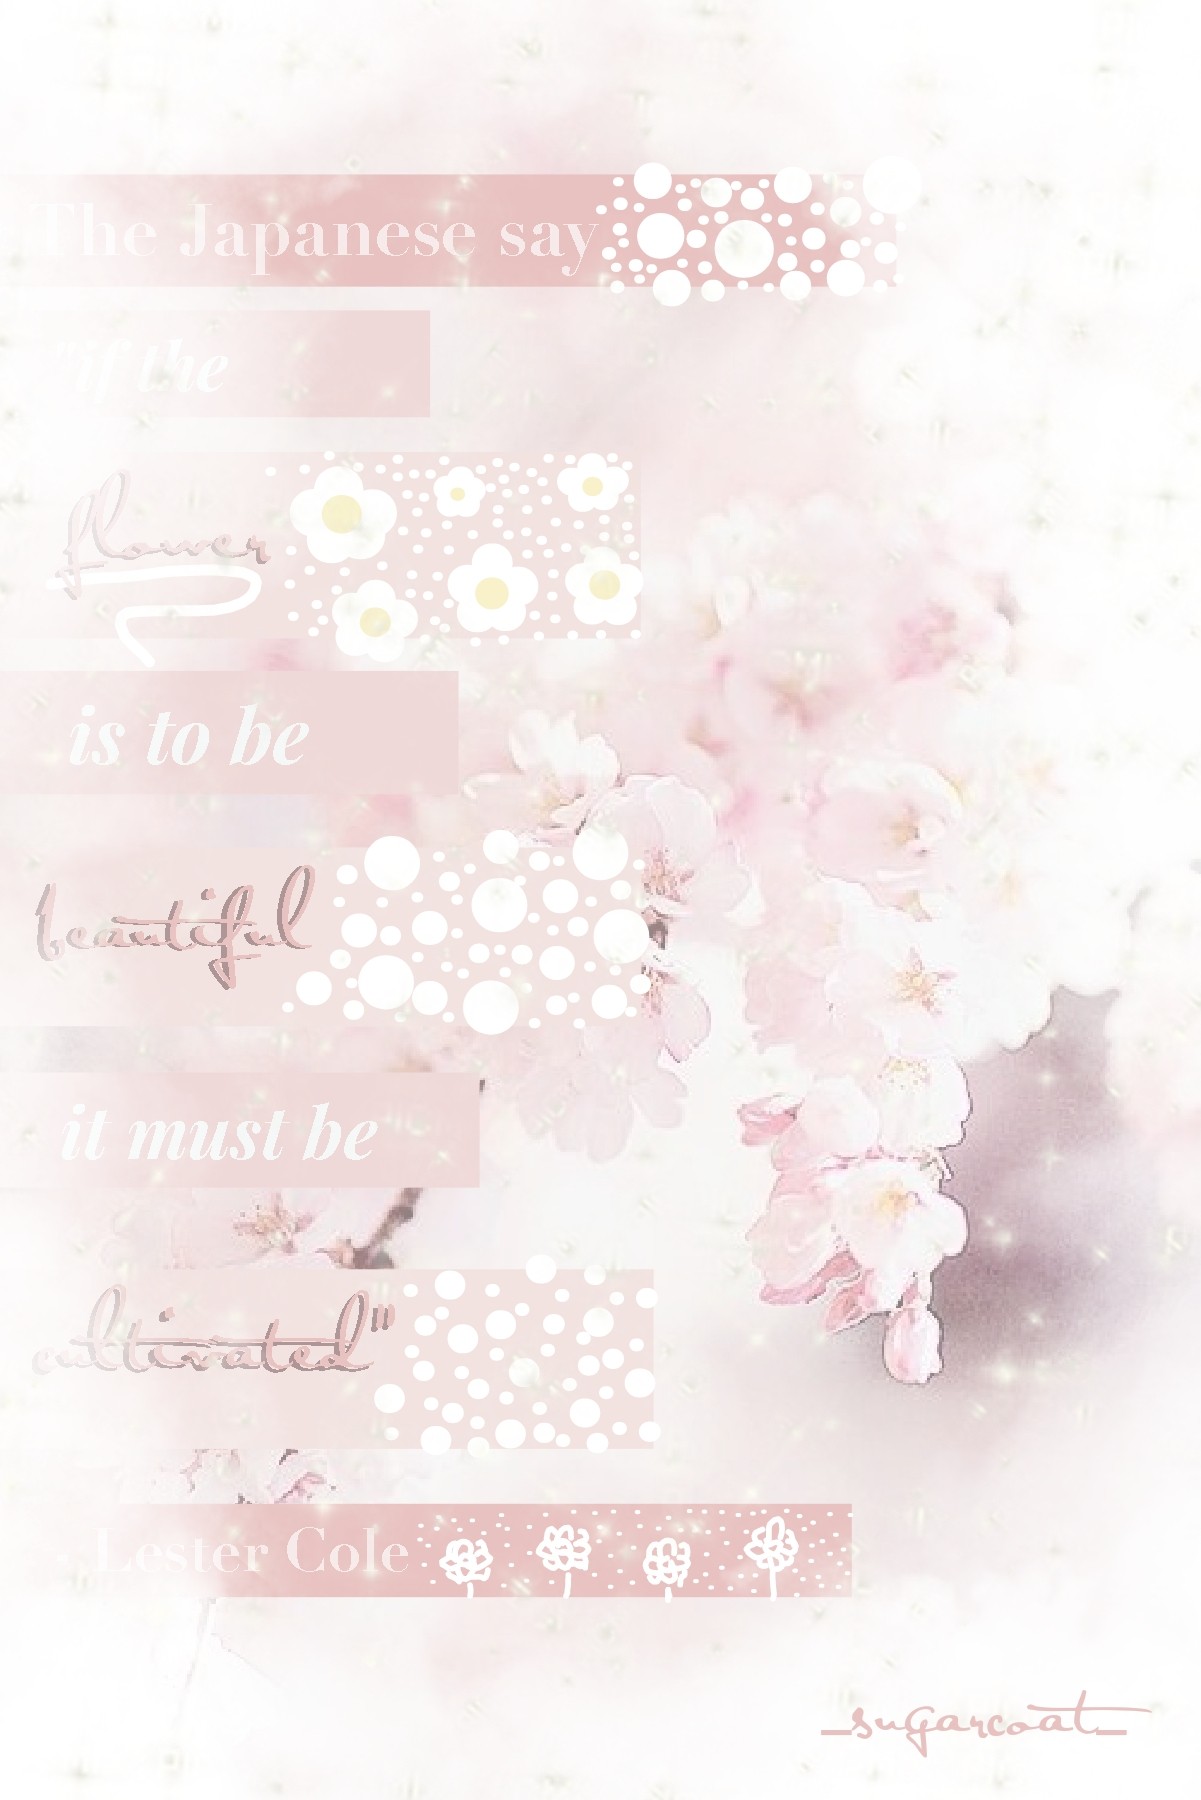 🌸TAP🌸
🌸02-03-23🌸
Bonjour muffins! Ça va? I like how this turned out! it looks so cute 💕 sorry for not posting last weekend i kinda got distracted q; how many languages do you know? a: 2 learning 🇫🇷 love y'all 💞